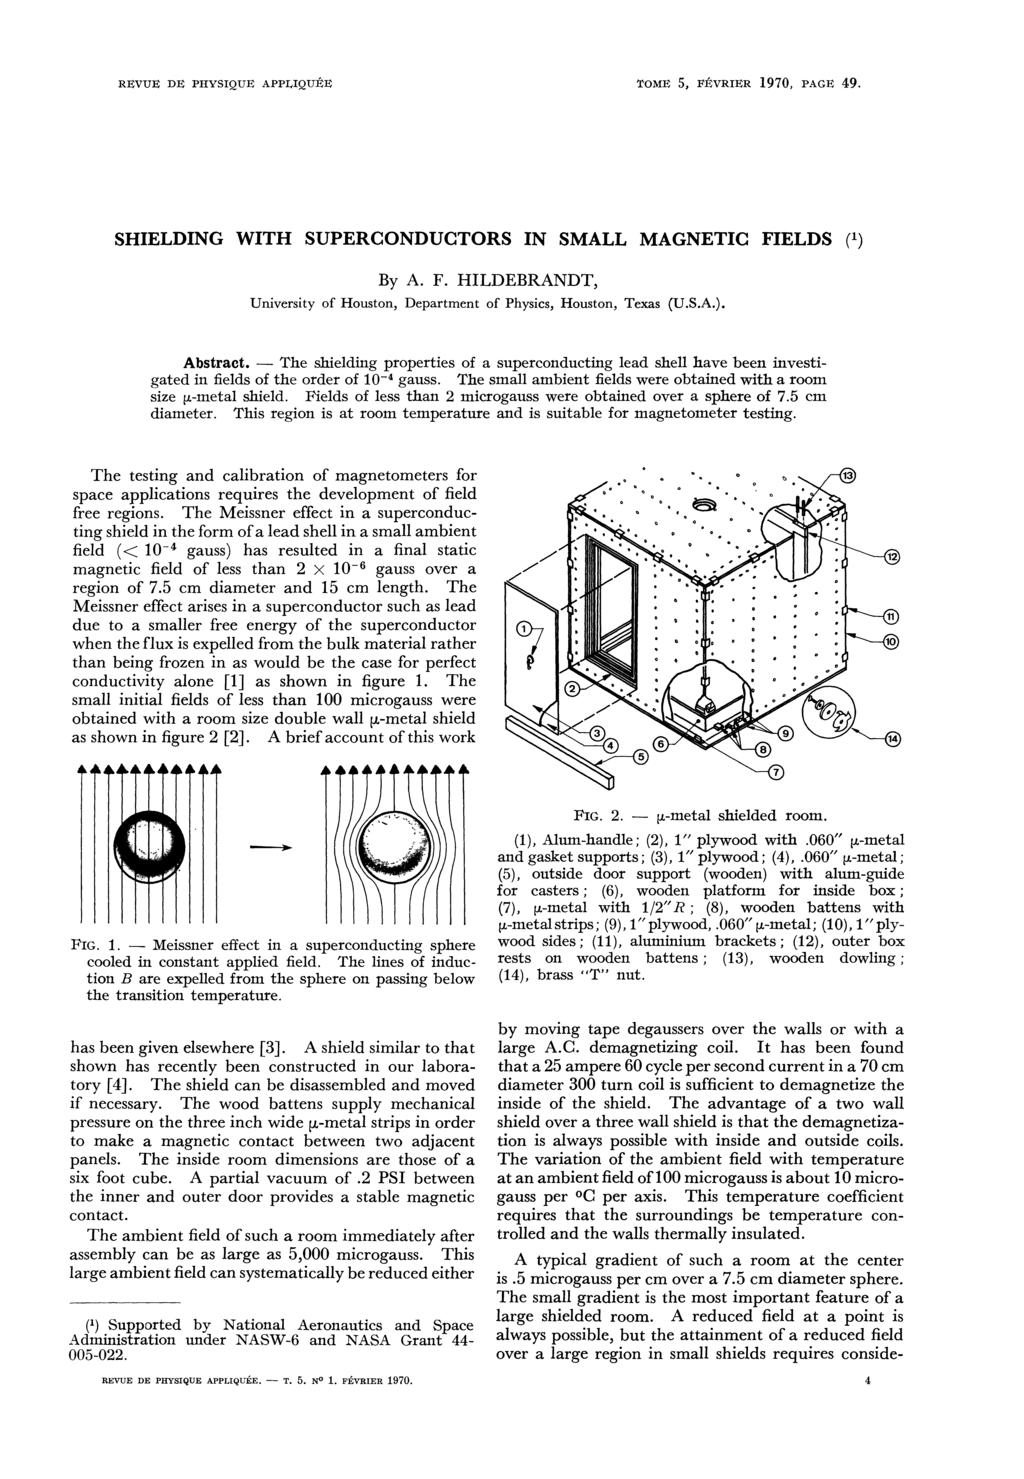 Meissner The ymetal REVUE DE PHYSIQUE APPLIQUÉE TOME 5, FÉVRIER 1970, PAGE 49. SHIELDING WITH SUPERCONDUCTORS IN SMALL MAGNETIC FIELDS (1) By A. F. HILDEBRANDT, University of Houston, Department of Physics, Houston, Texas (U.